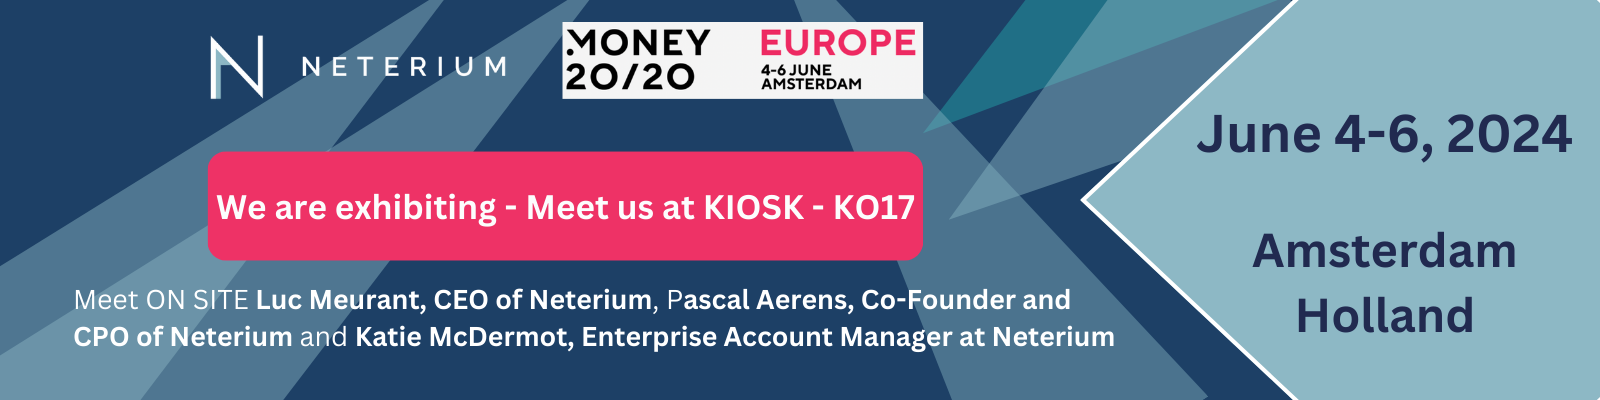 Neterium announces its presence at Money2020 Europe in Amsterdam! Come visit us at KIOSK K017